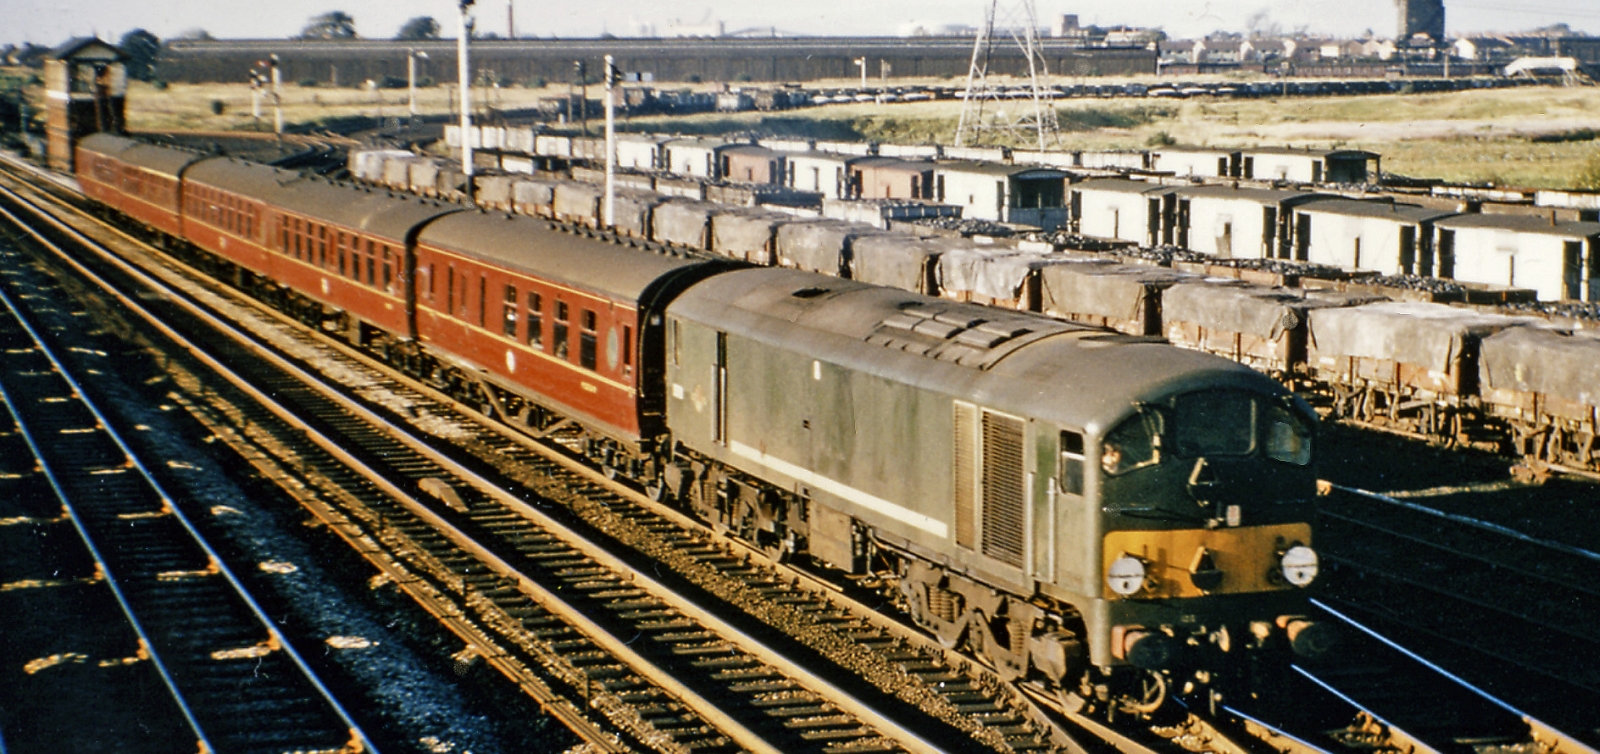 D5718 in September 1965 with an express train at Farington Junction